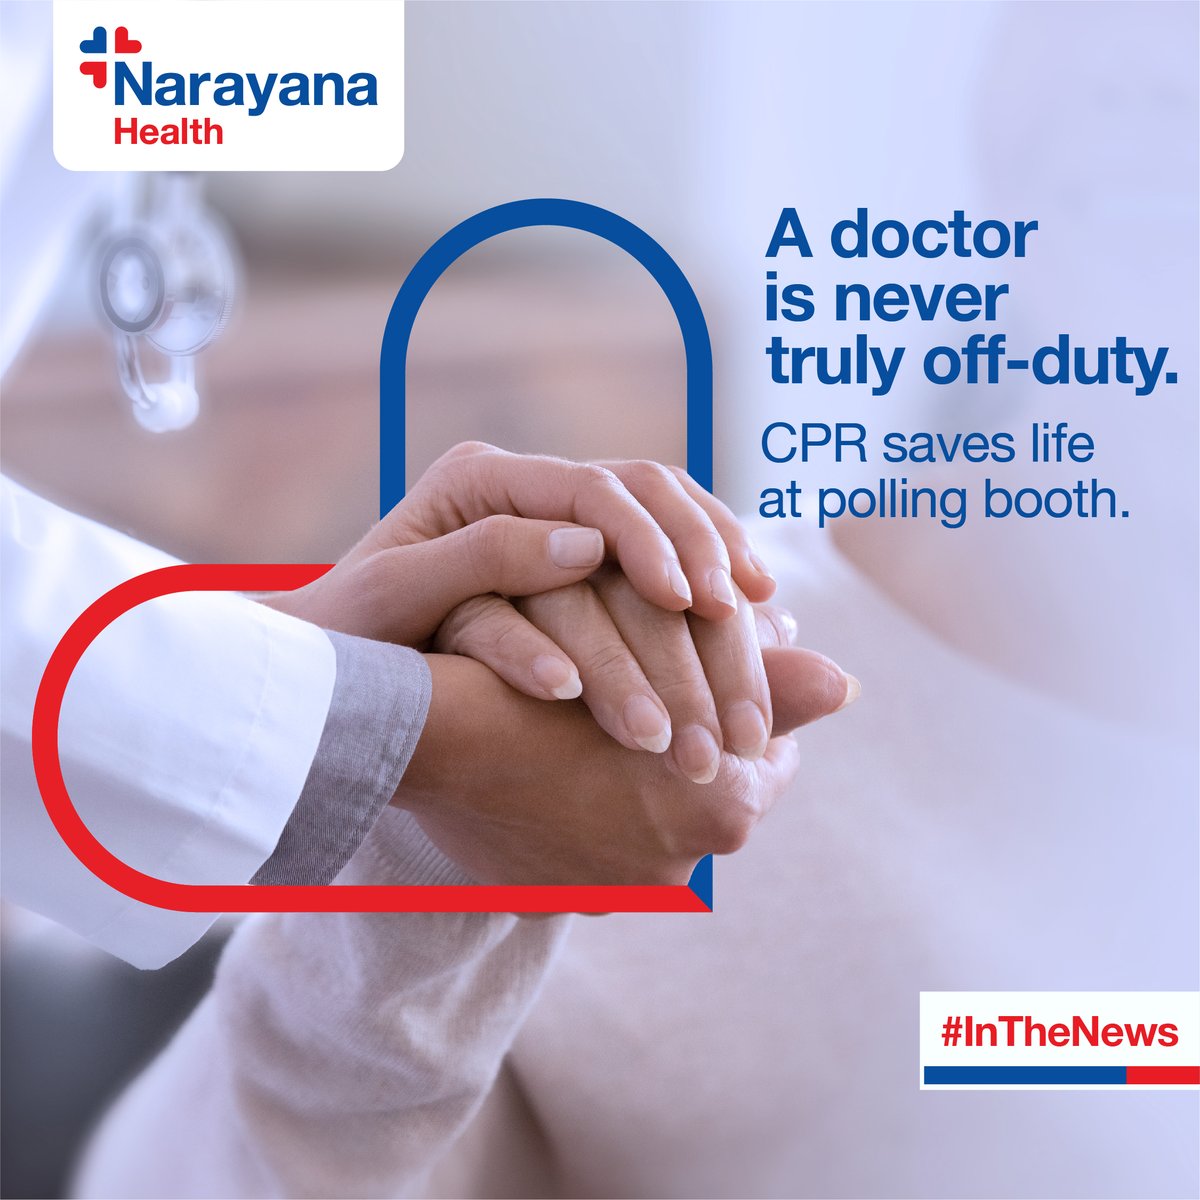 On Election Day, amidst the rush, @thisis_drgsp from Narayana Health City, Bangalore, heroically performed CPR, saving a woman from sudden cardiac arrest. Thanks to his swift action, she made a speedy recovery. #ElectionDay #Bangalore #TakeCare #NarayanaHealth